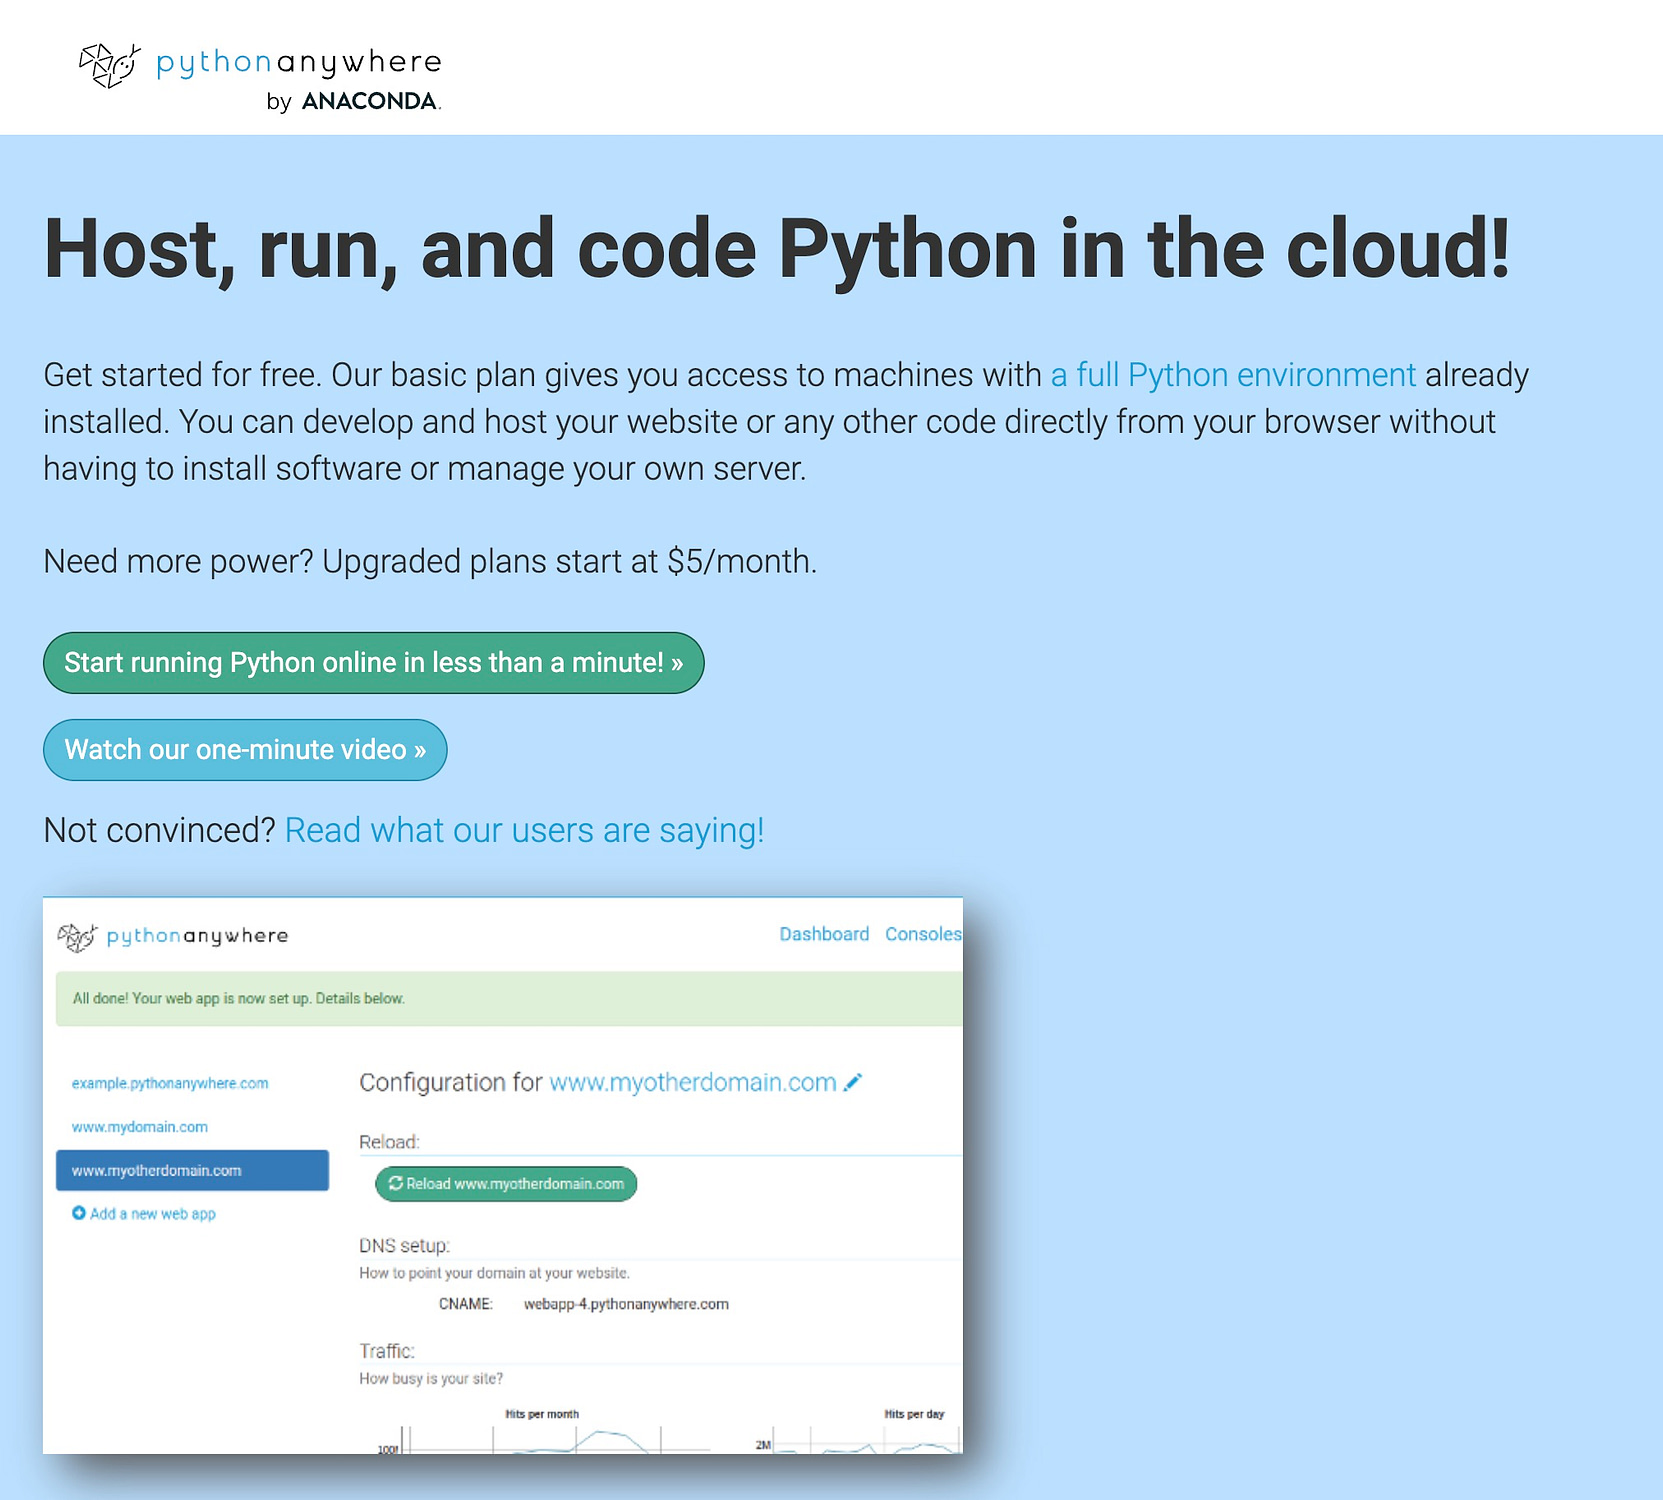 Python Anywhere offers some of the best hosting for Django.